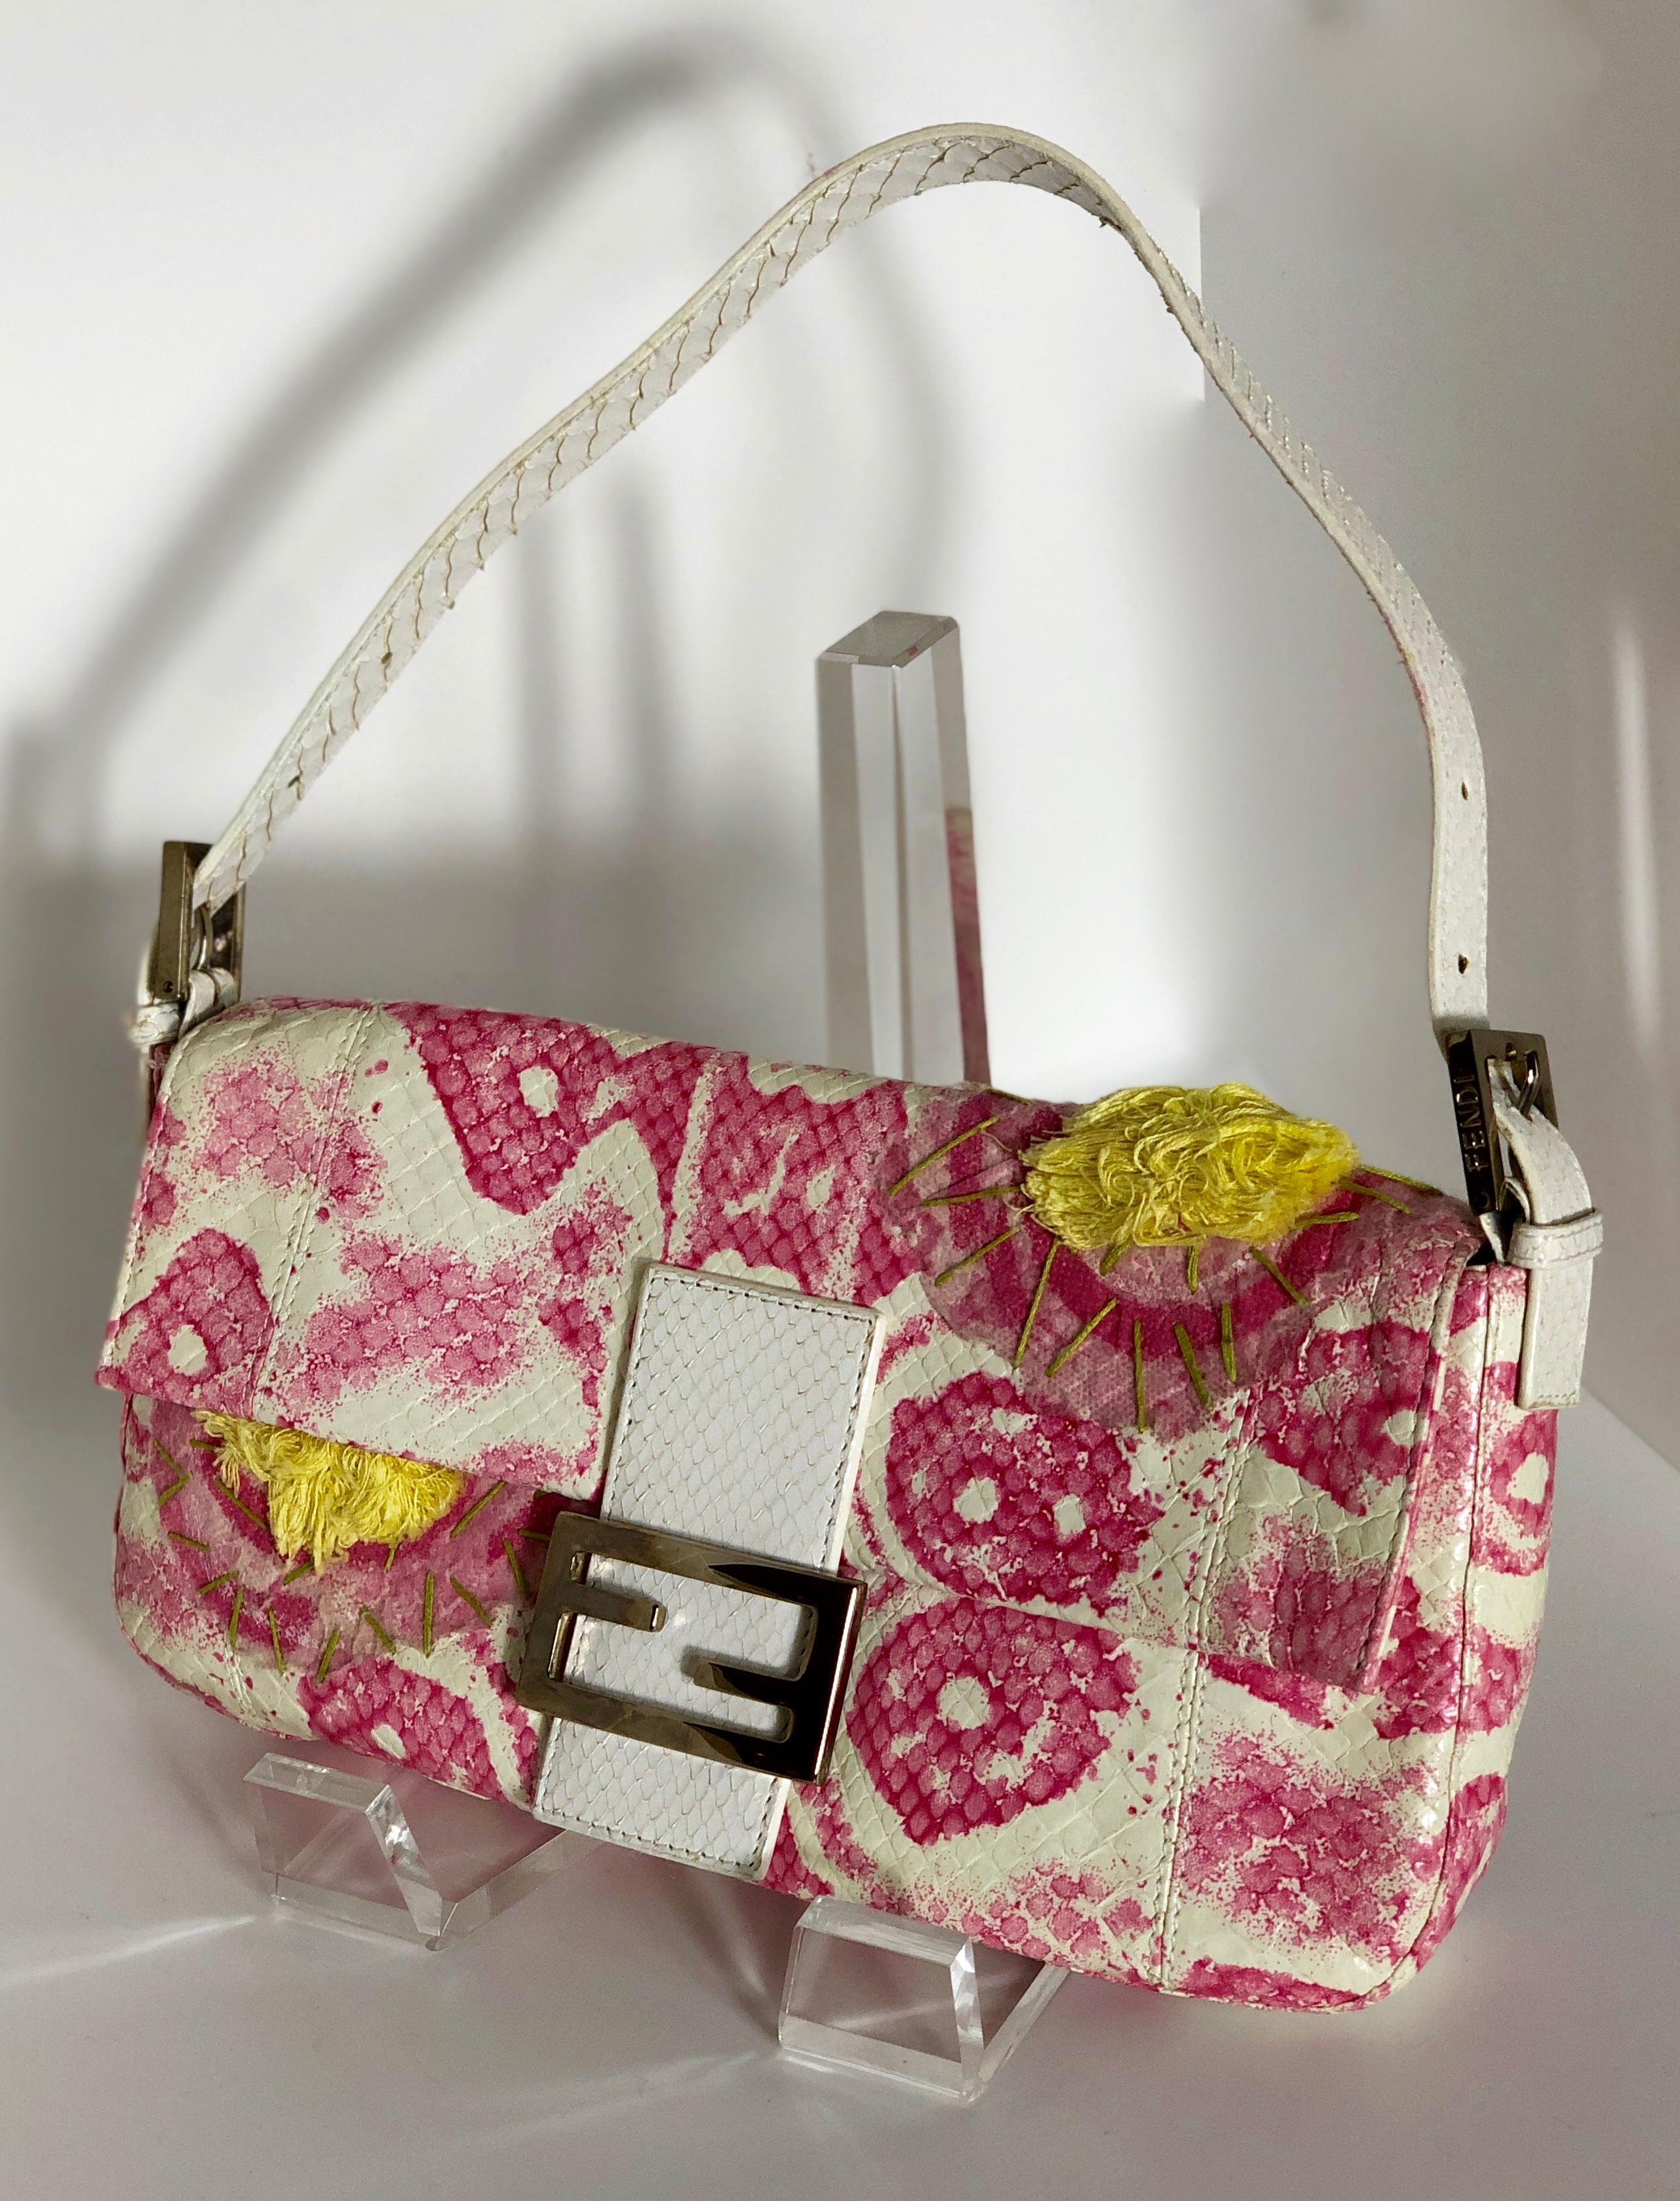 Fendi White Snake Skin w/ Pink & Yellow Accents Baguette Handbag  In Good Condition For Sale In Houston, TX